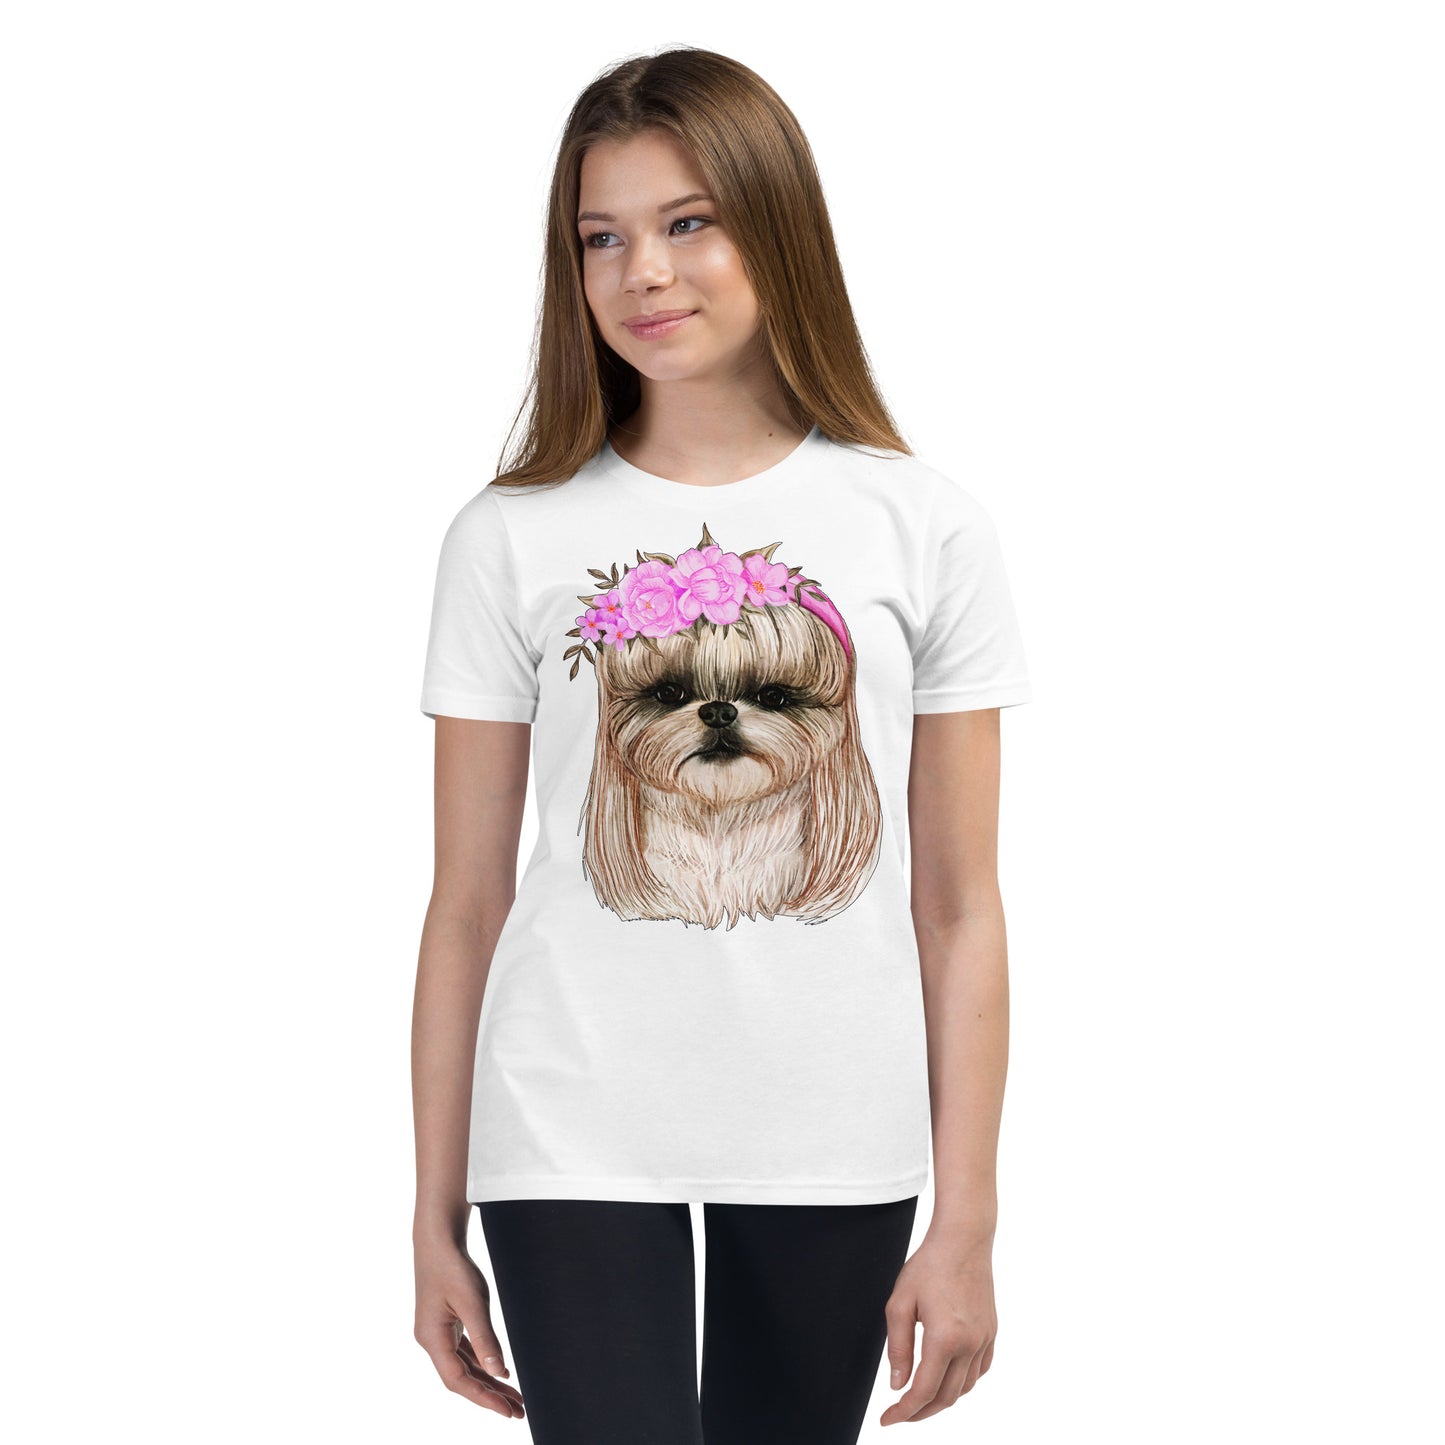 Adorable Dog with Flower Hair Crowns T-shirt, No. 0562